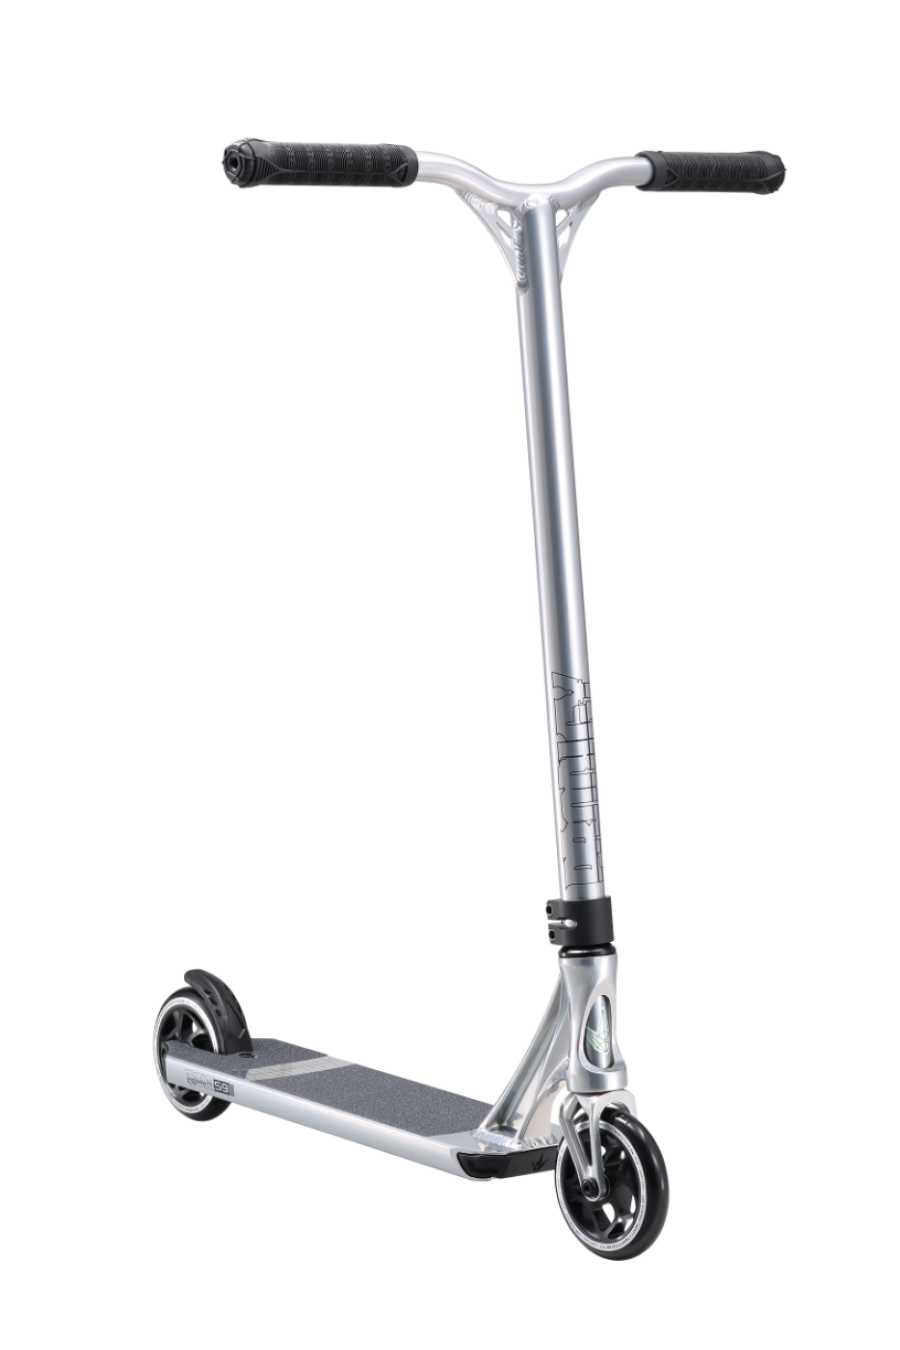 Envy Prodigy S9 Complete Scooter (Chrome)